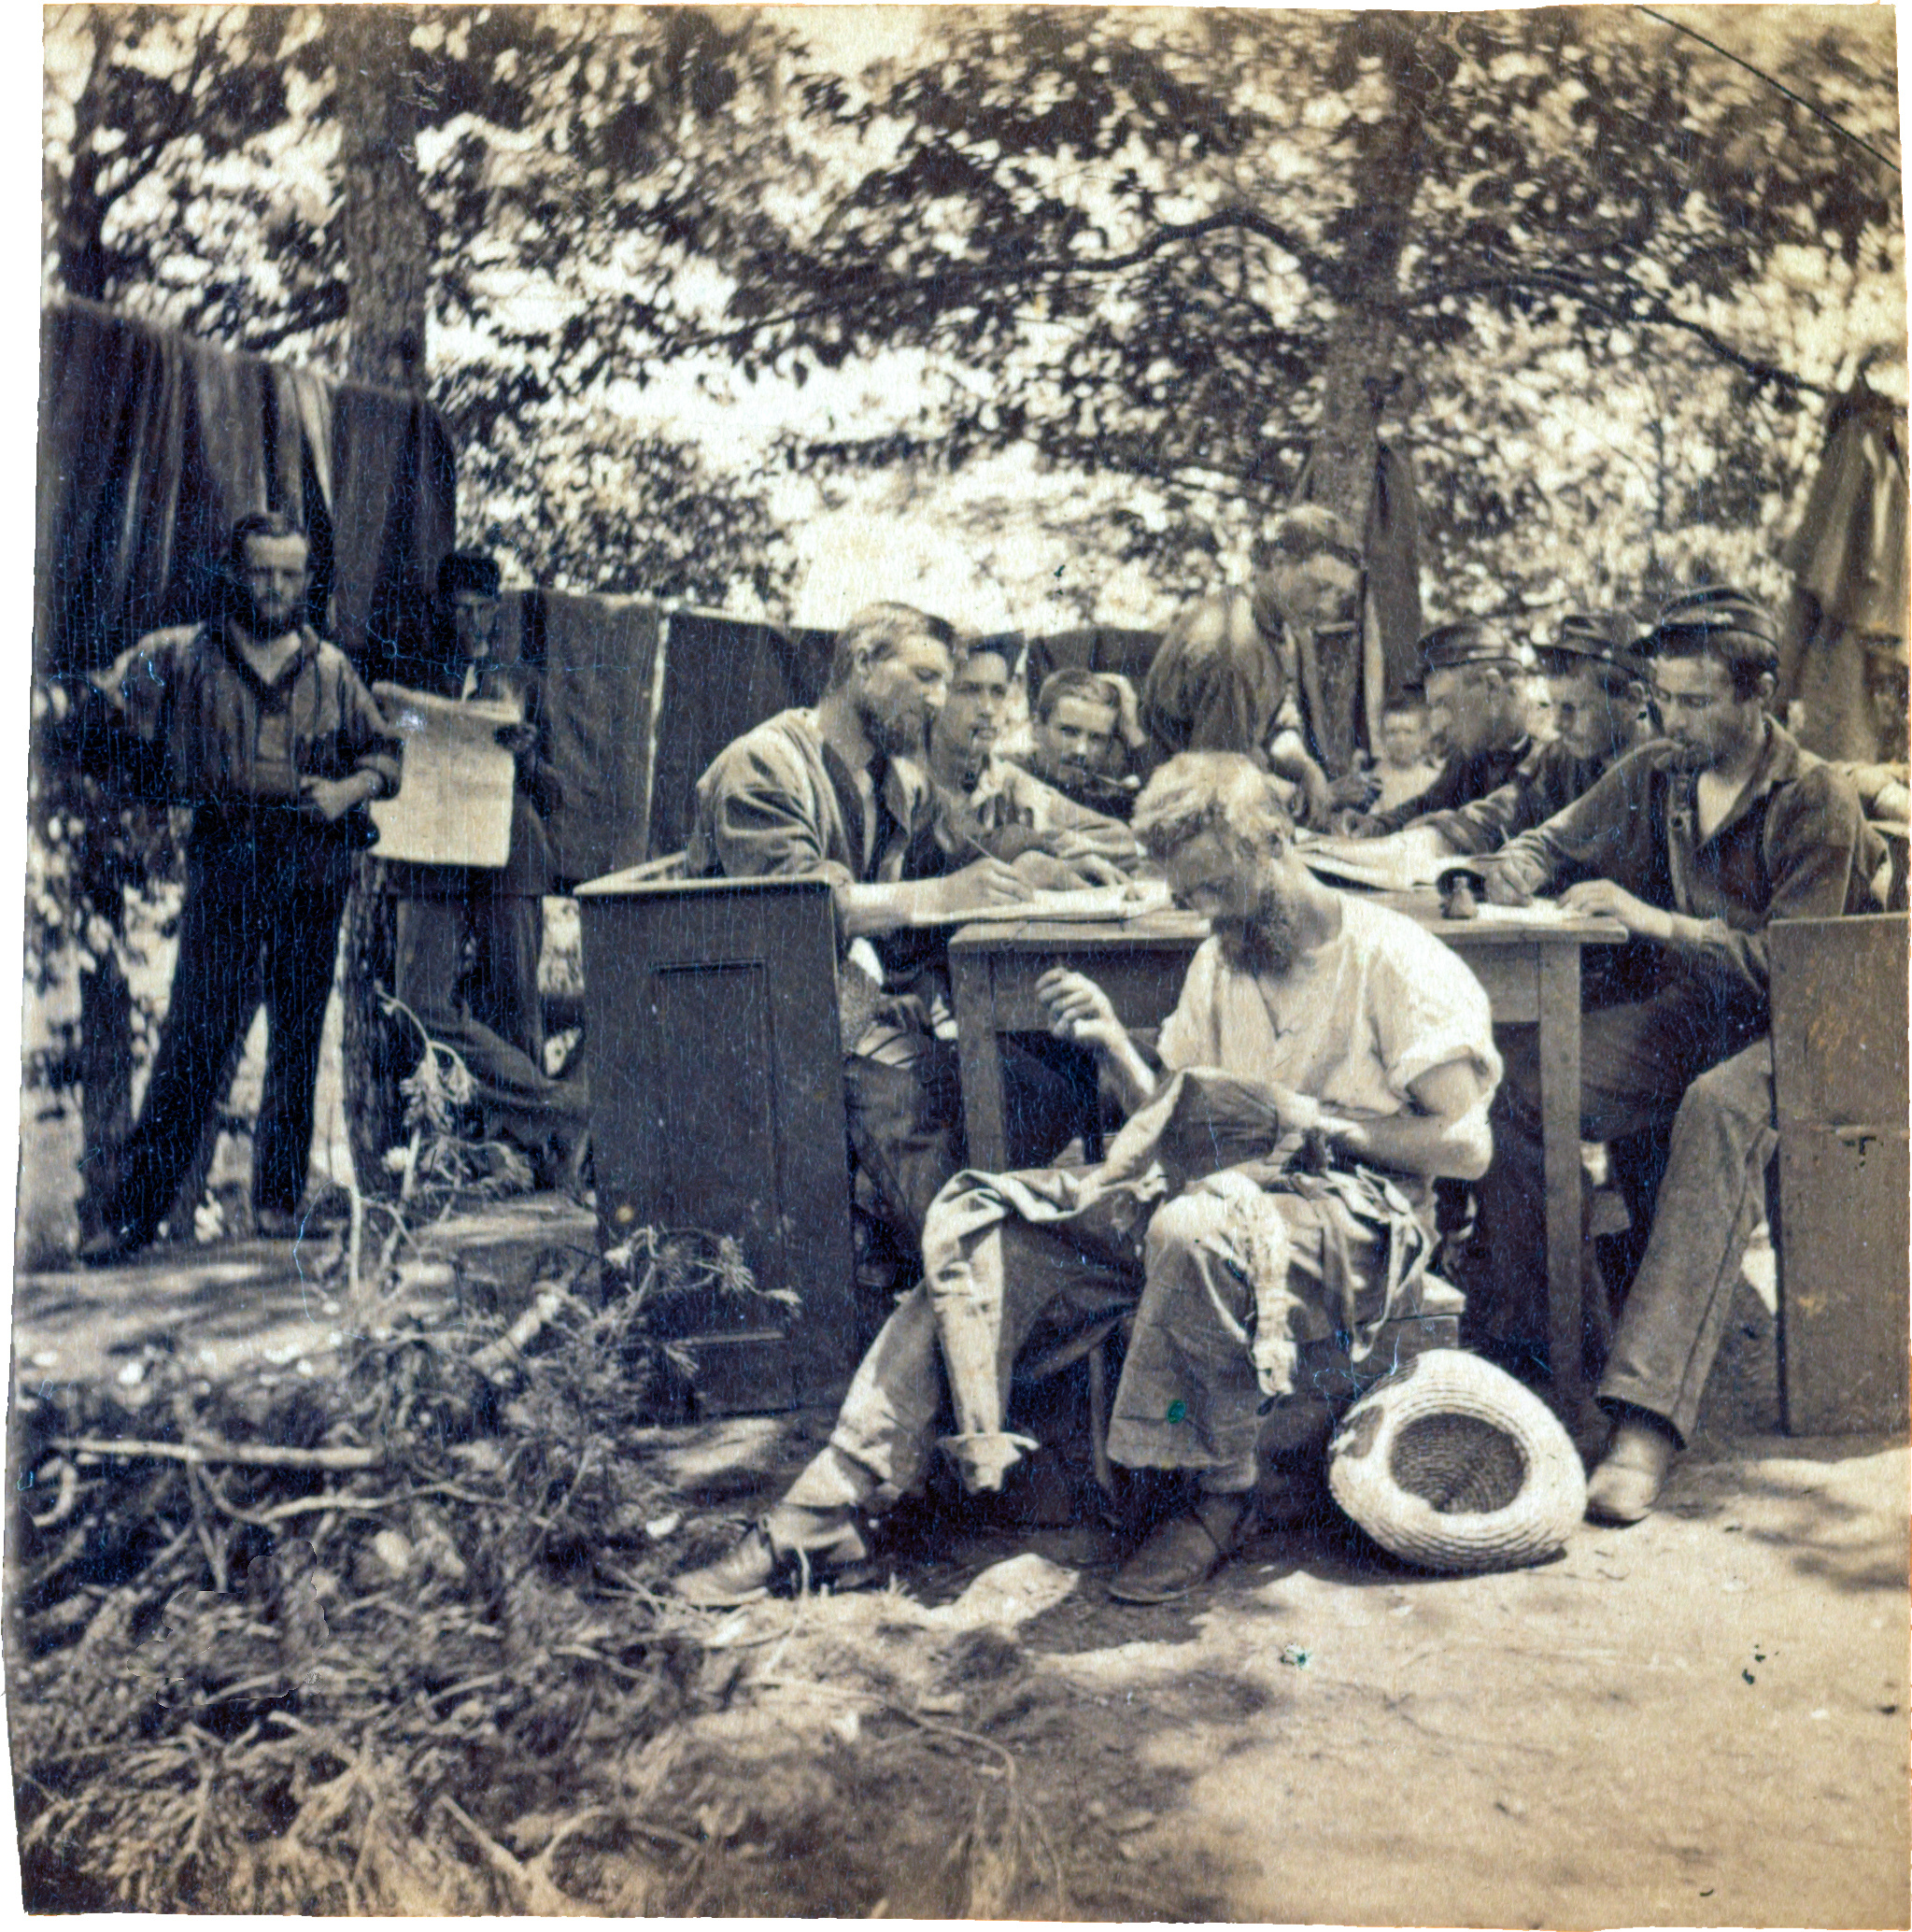 Boston Light Artillery soldiers in camp at Relay House in Maryland sitting at a long table, writing letters, as one soldier, in the foreground, appears to be sewing.